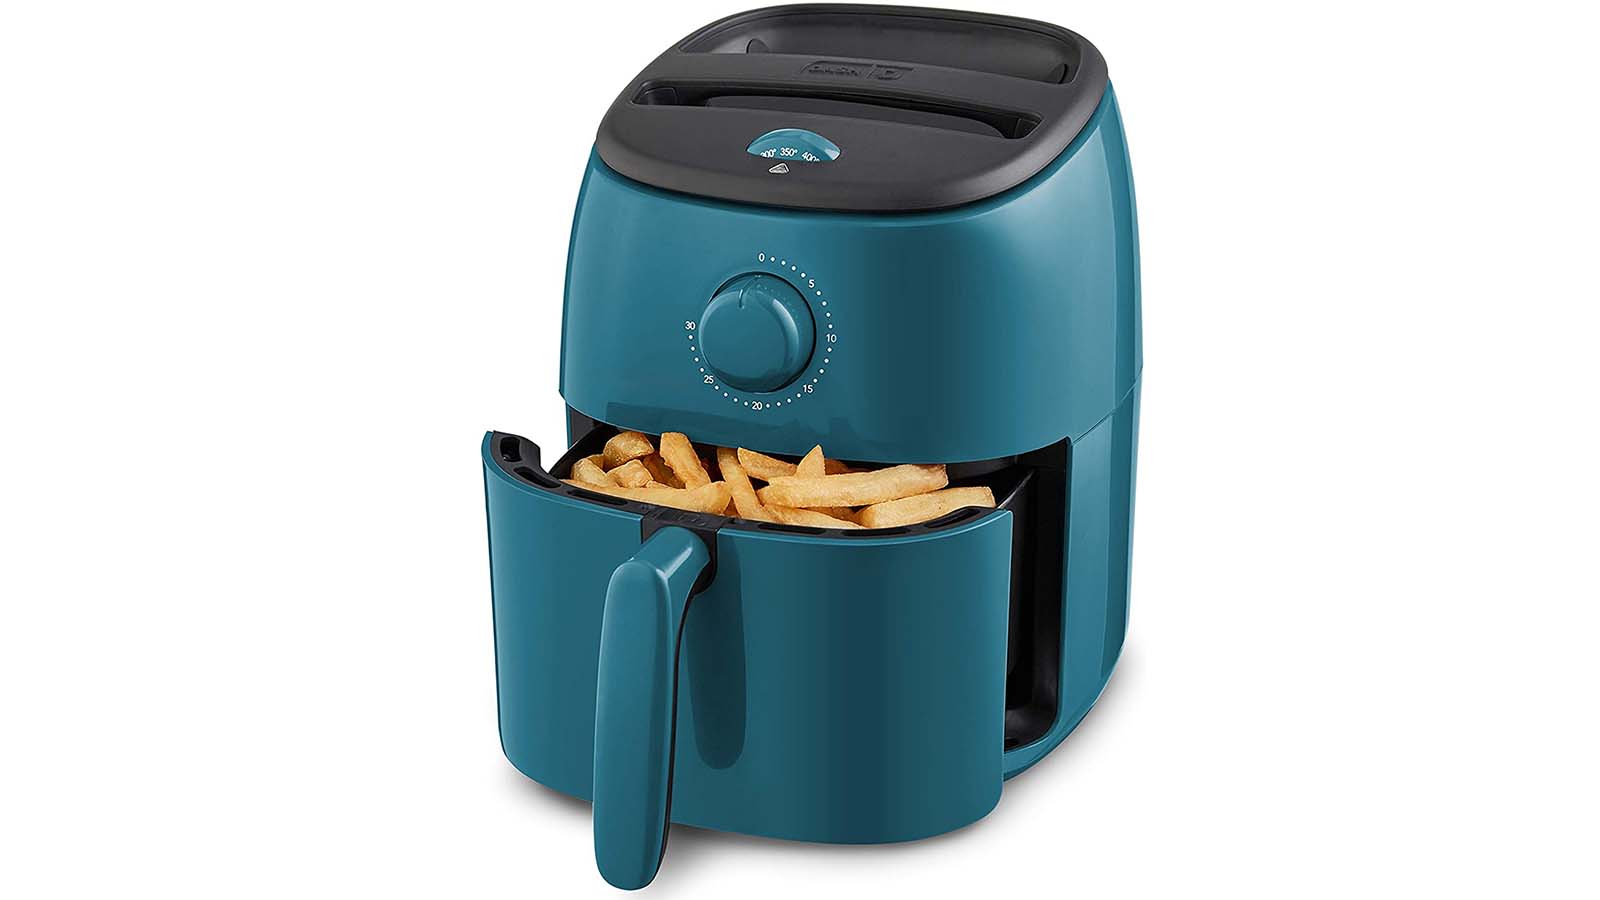 Prime Day Deal: This Dash air fryer is 25% off